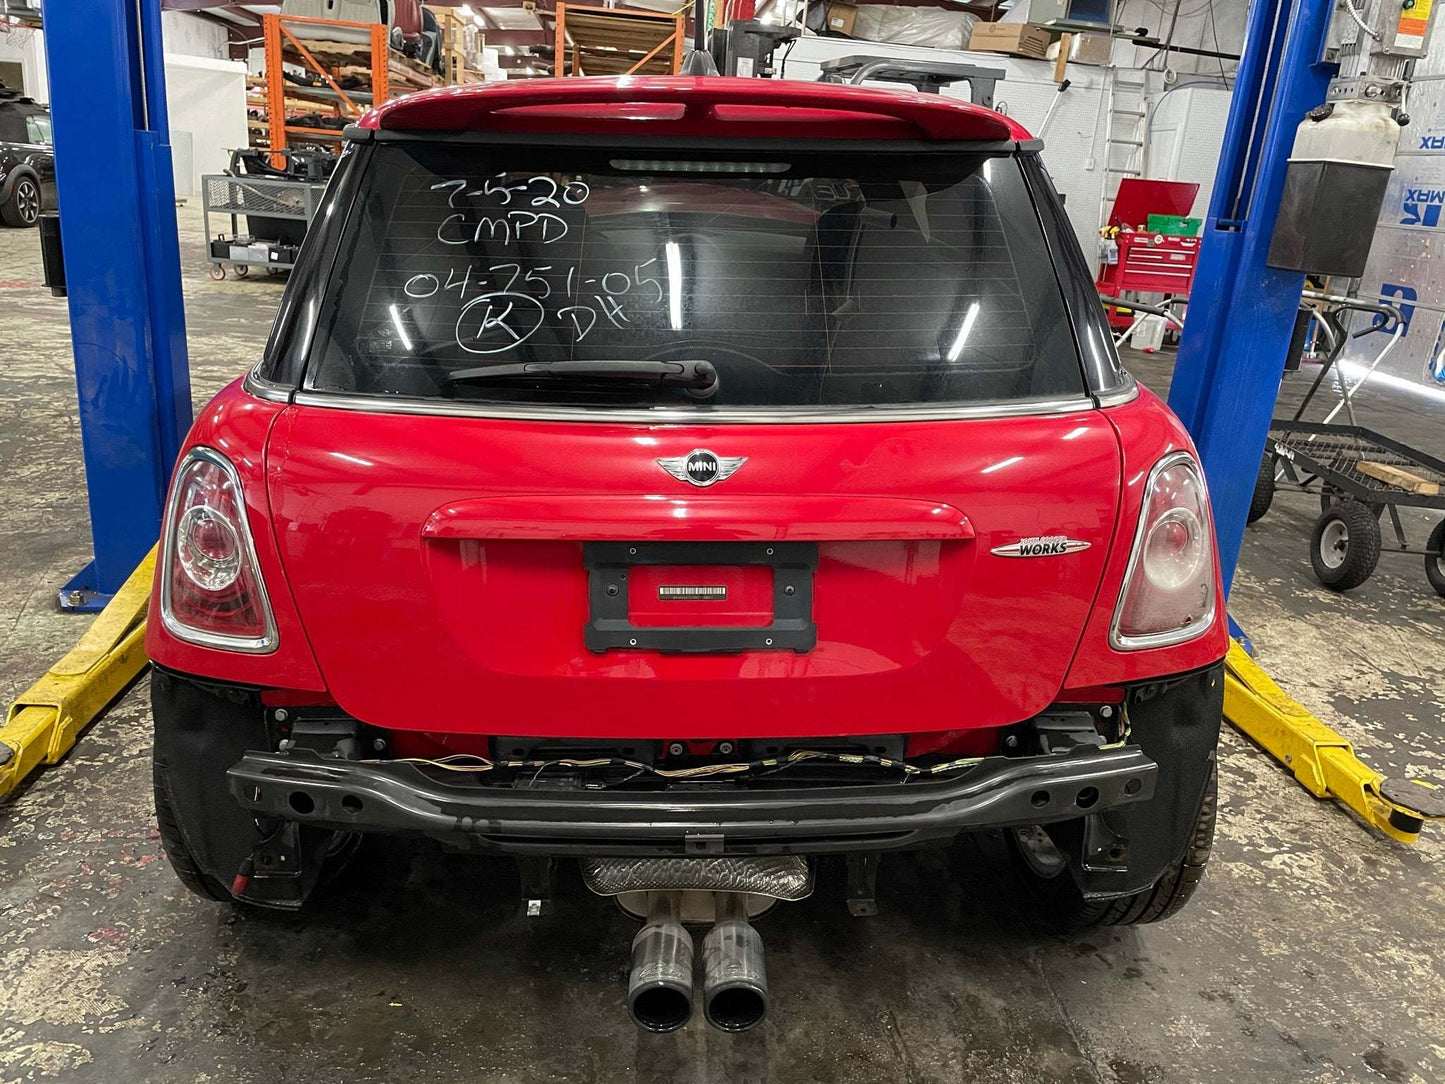 2012 MINI Cooper Hatchback S with JCW Package, New Parts Car (May 2021) Stk # 236